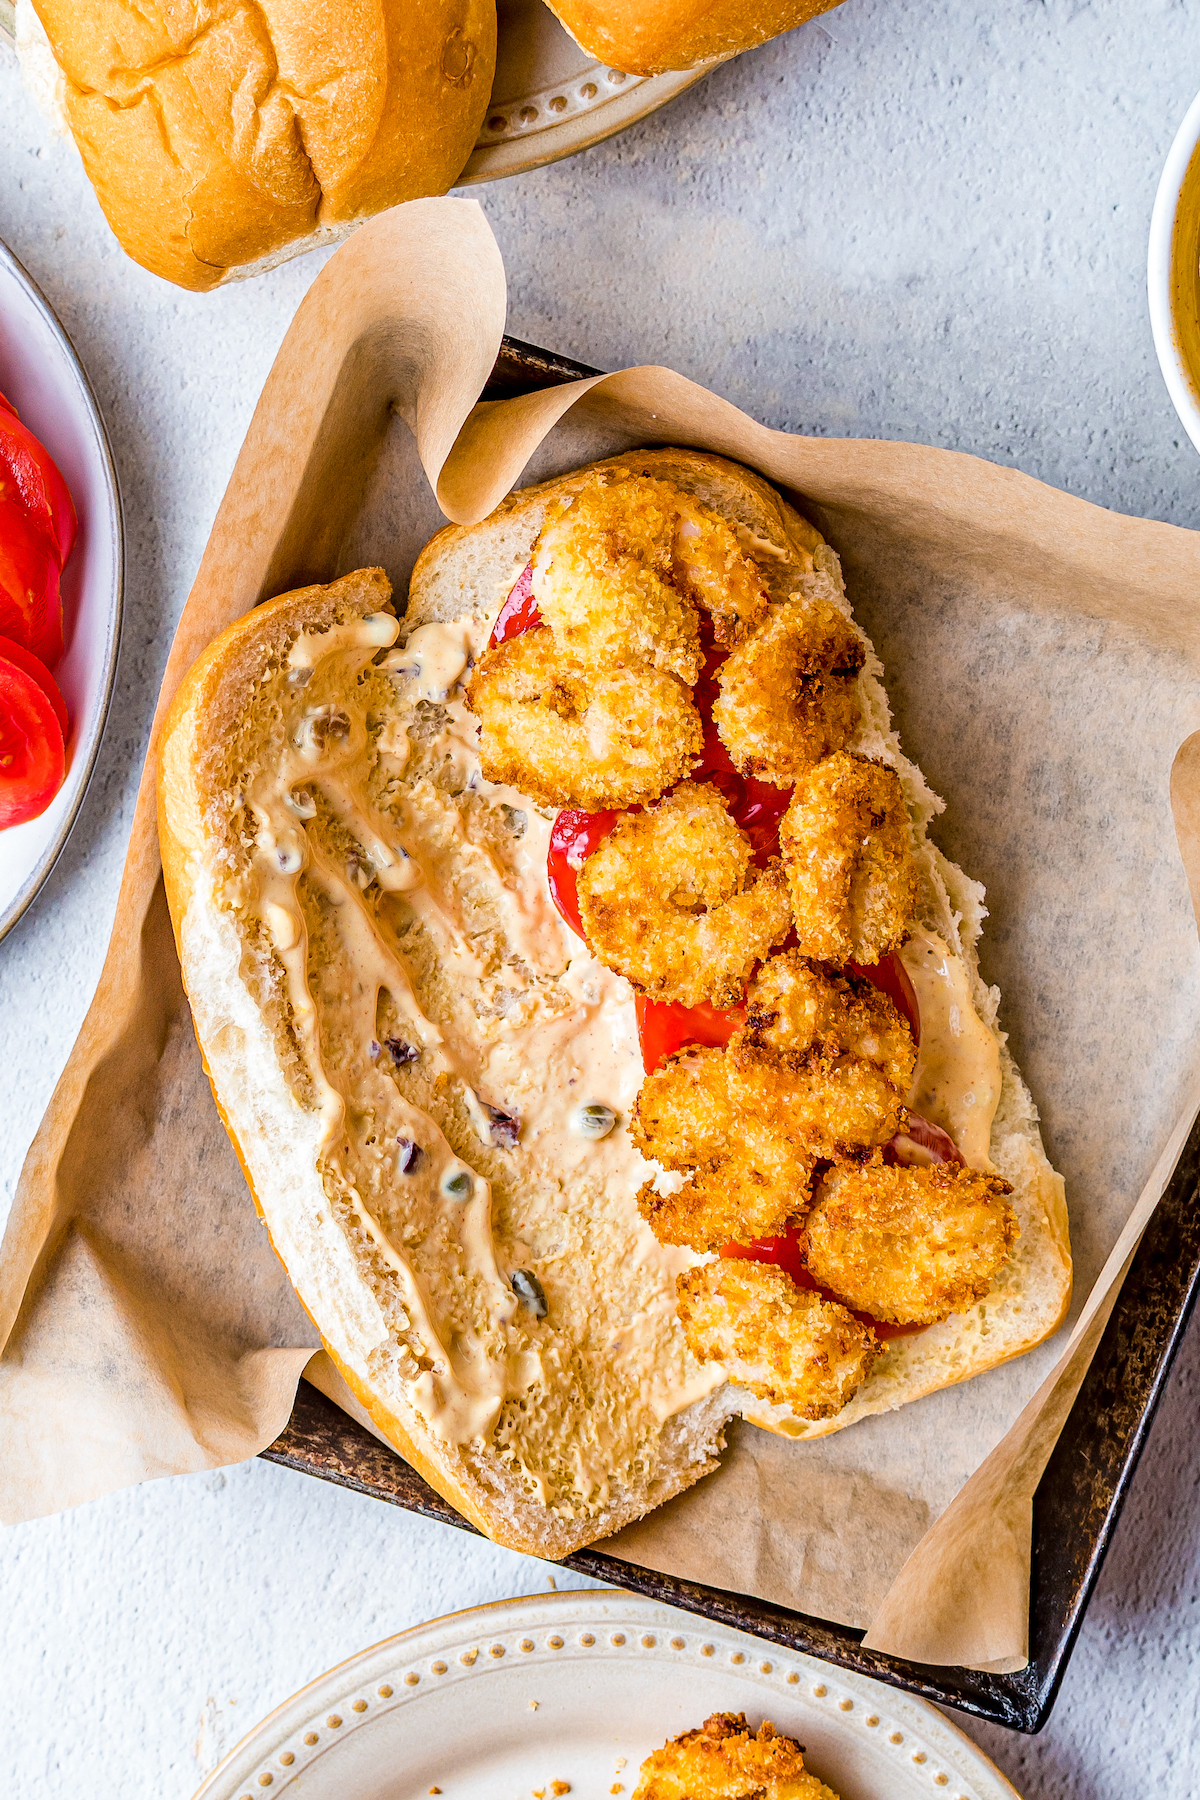 A sandwich bun topped with remoulade, sliced tomatoes, and breaded fried shrimp.